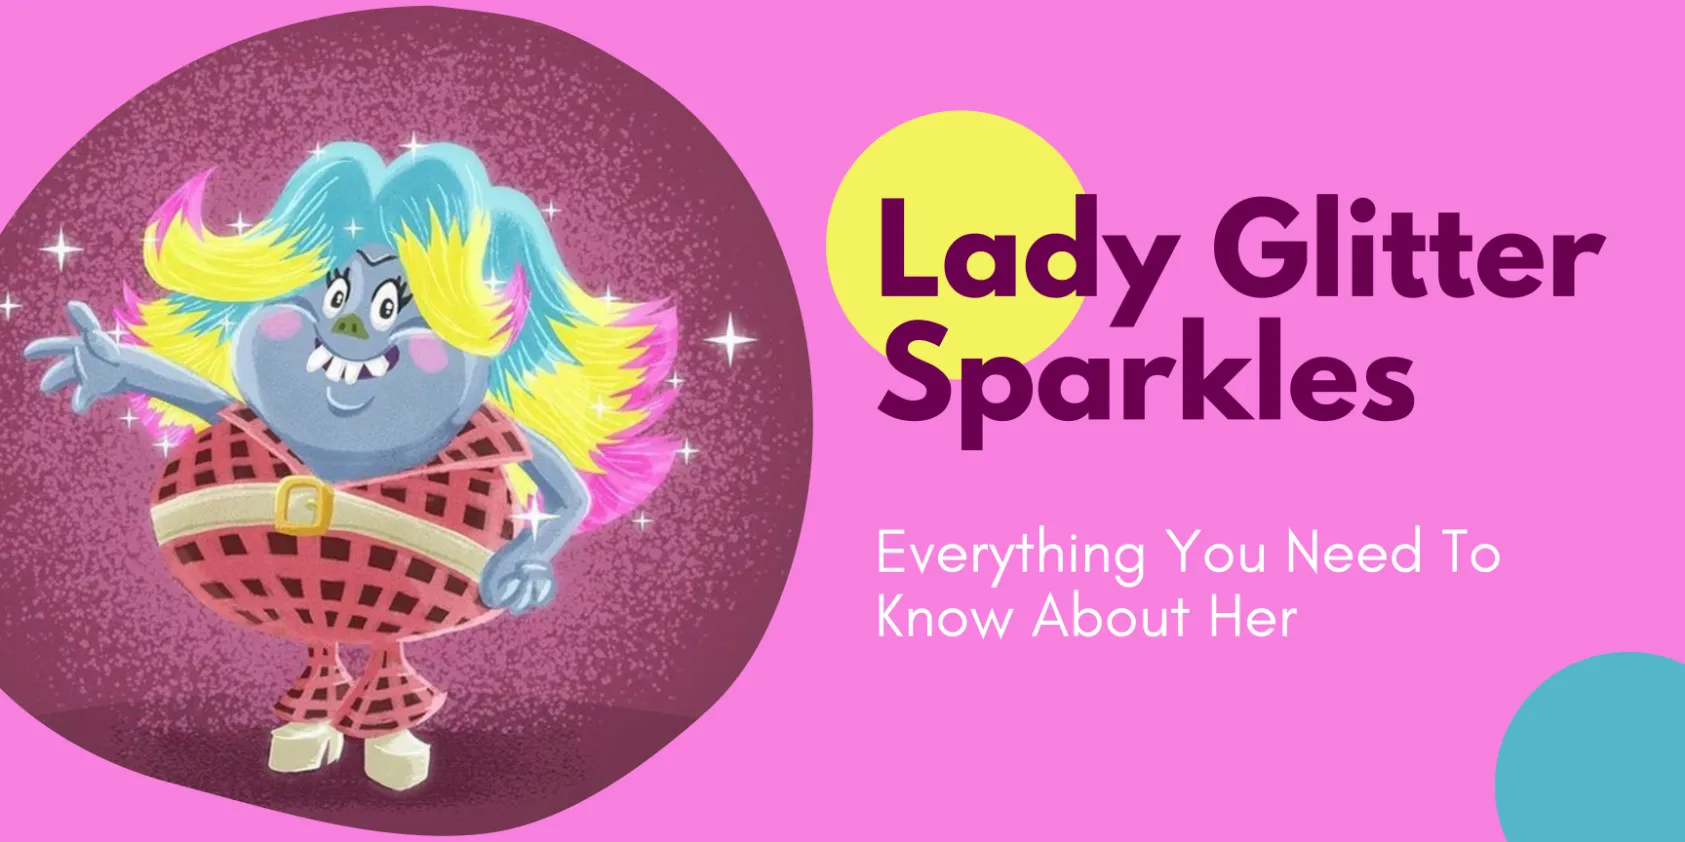 Lady Glitter Sparkles Trolls: Everything Related to Queen Bridget